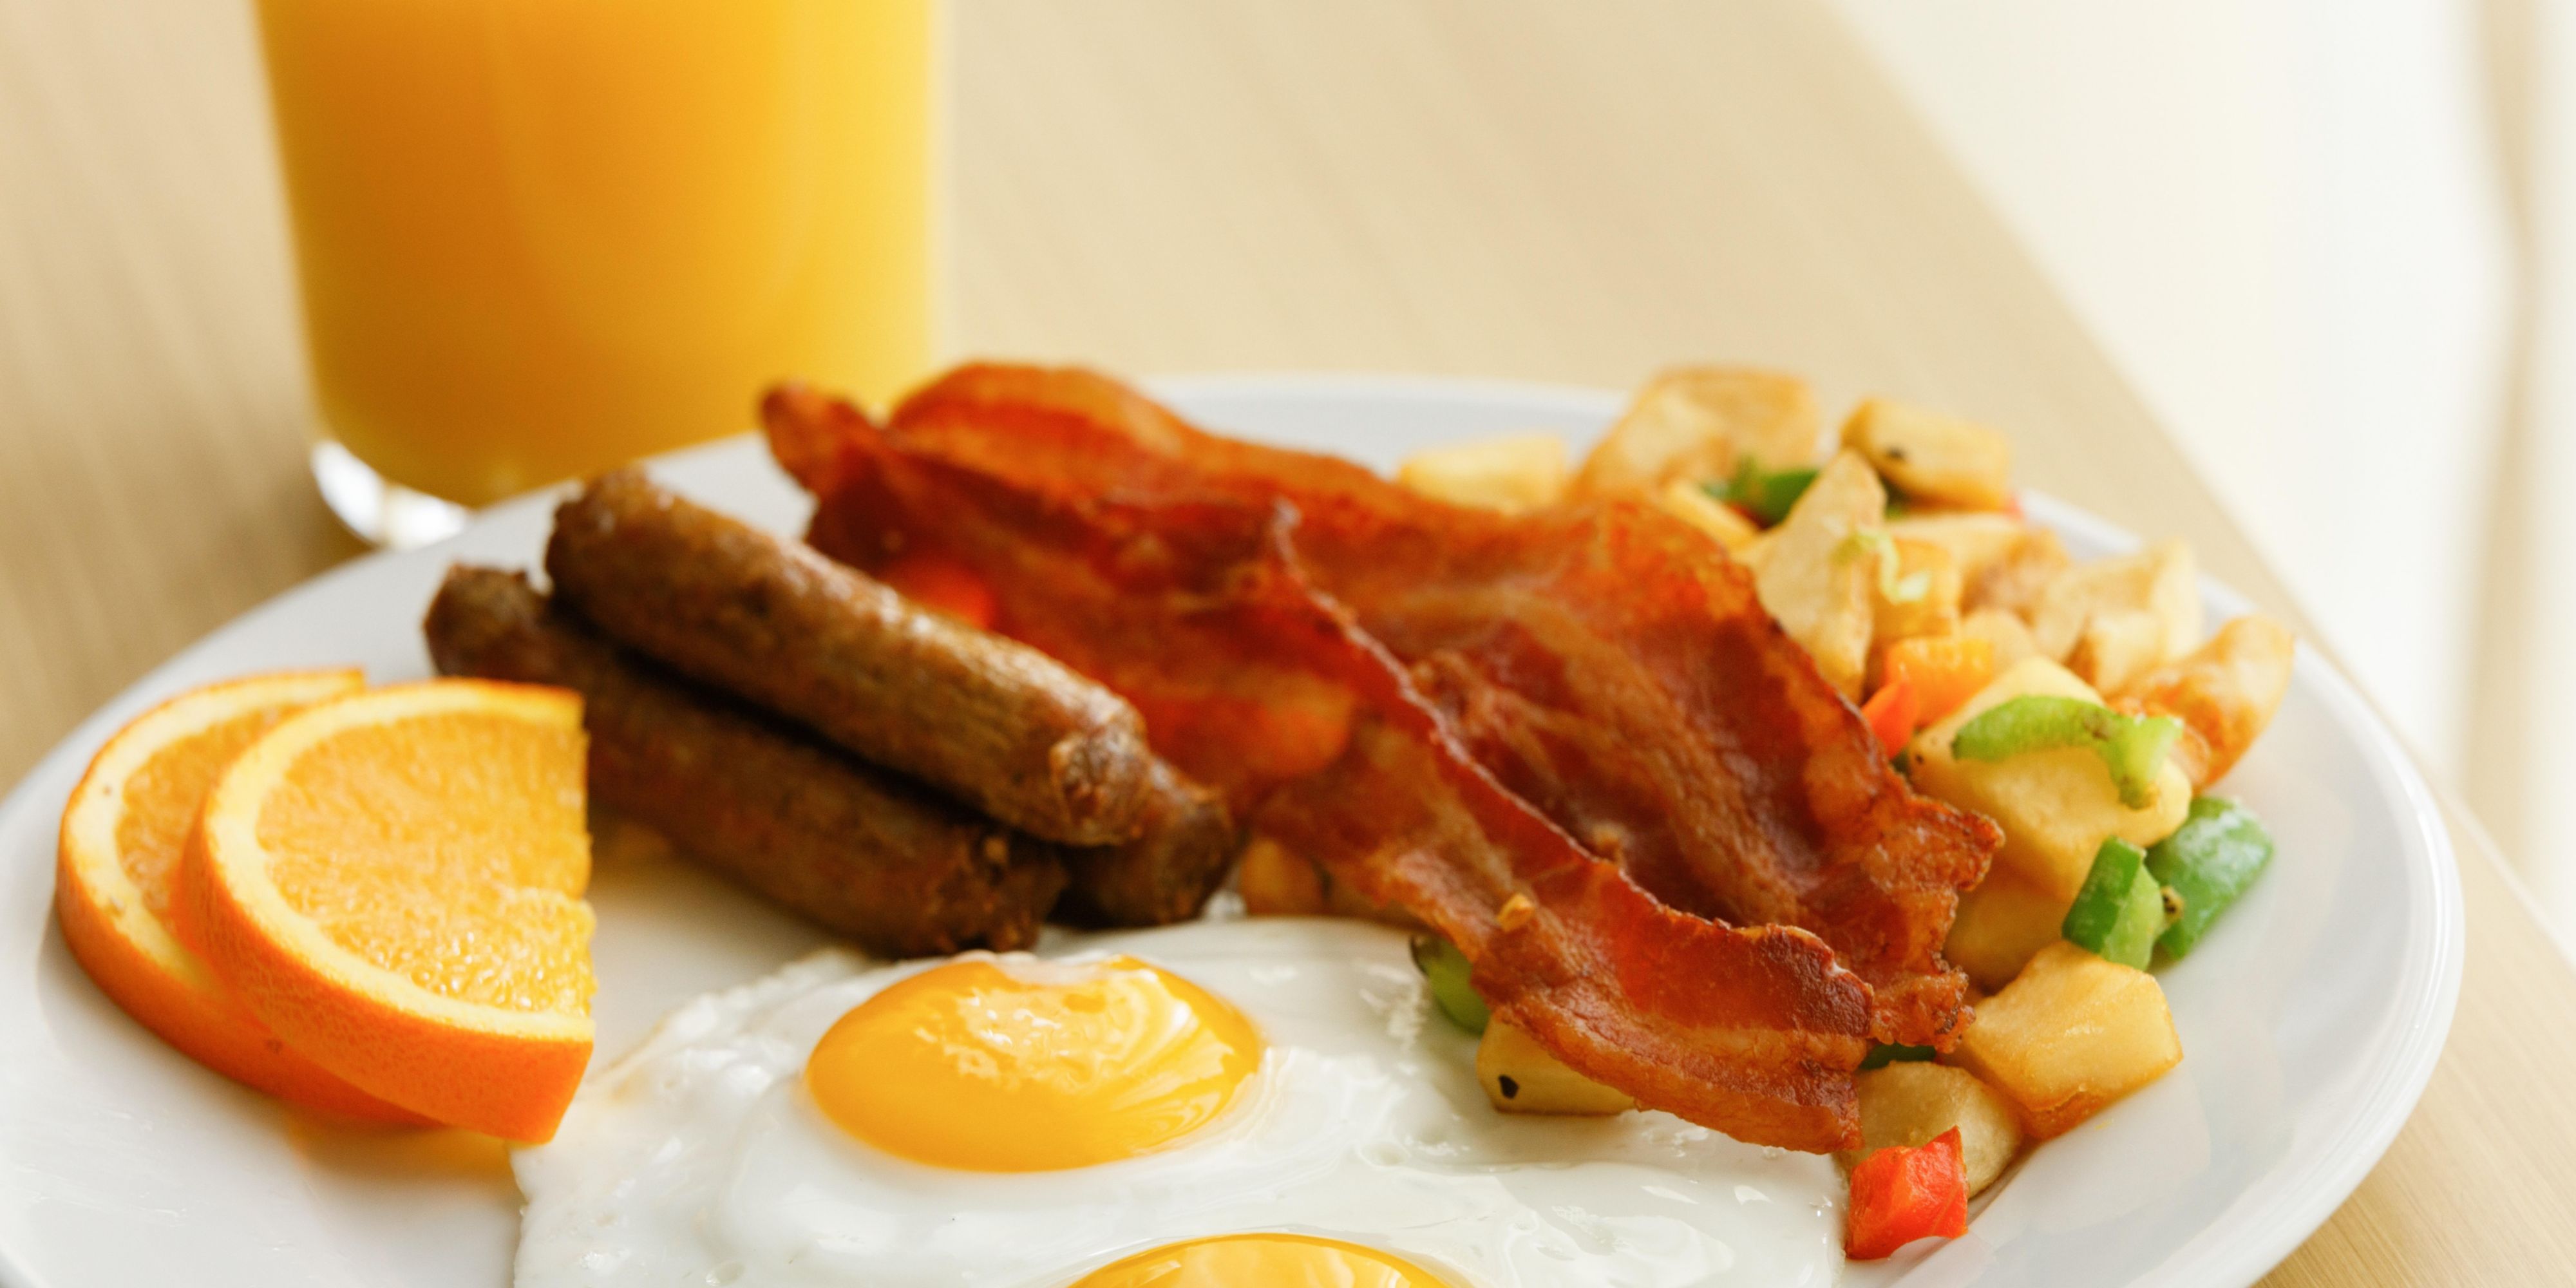 Start your morning on the Sunny side at The 1750 Grille.